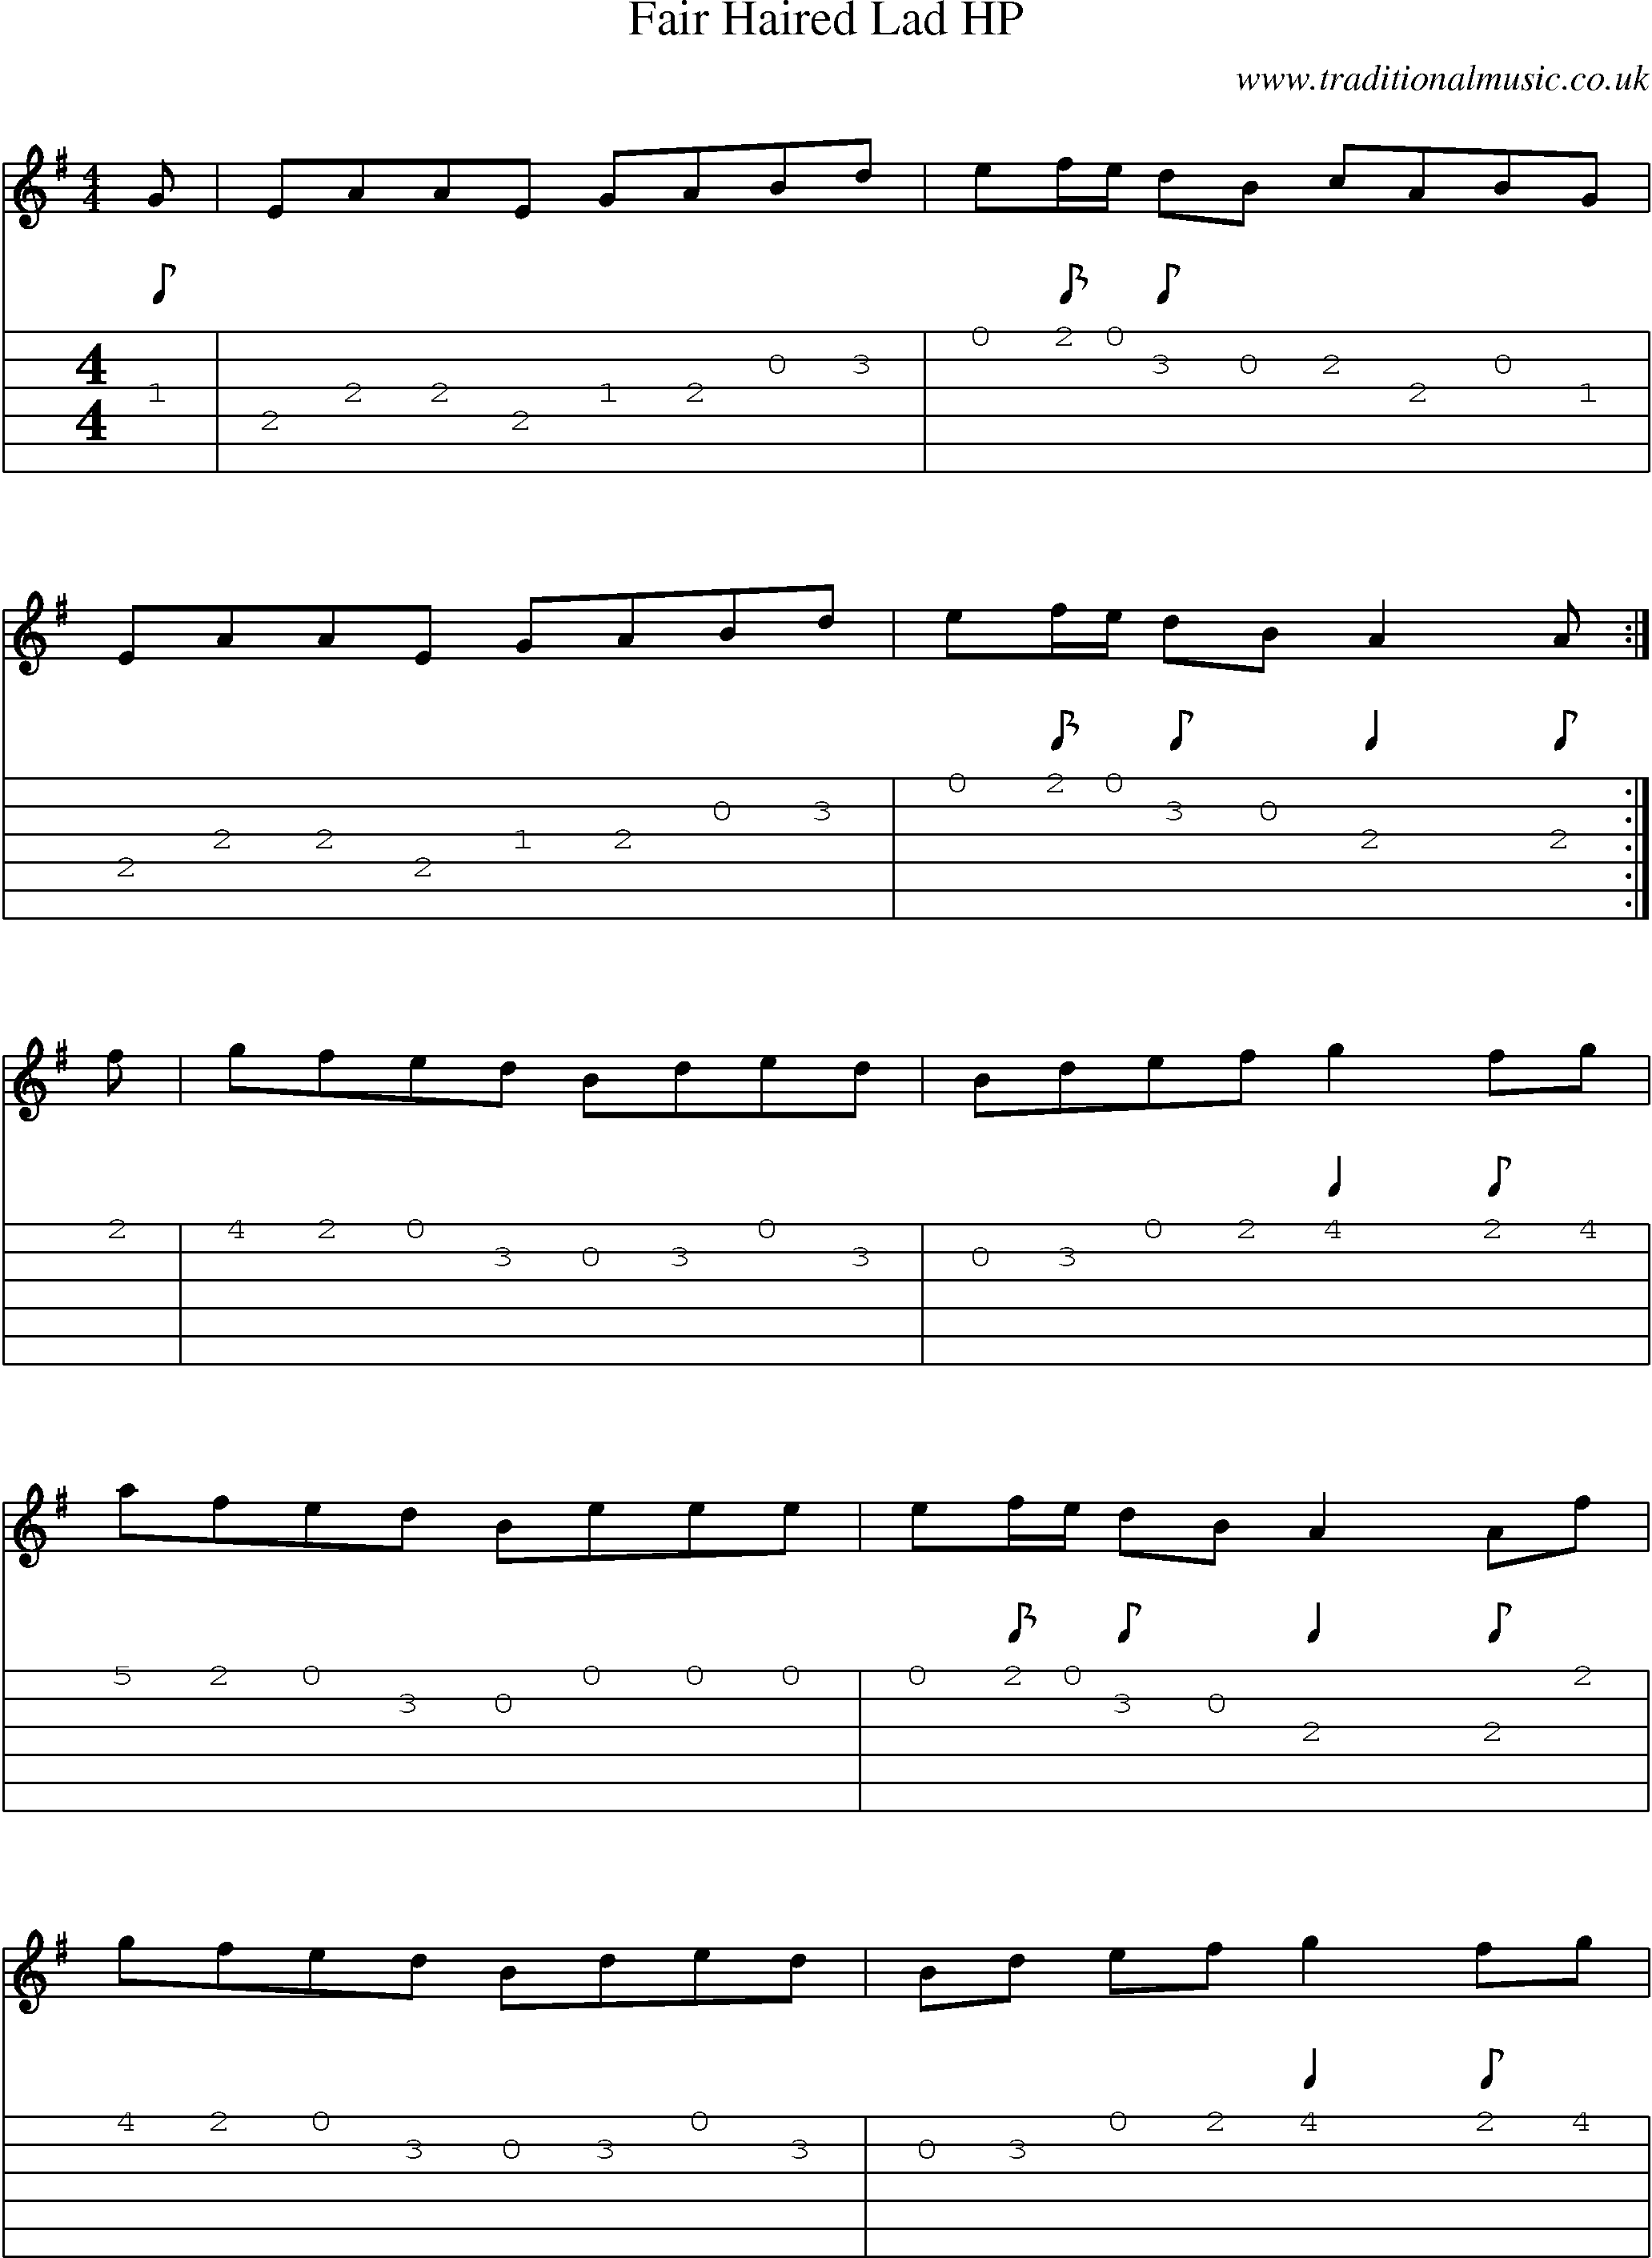 Music Score and Guitar Tabs for Fair Haired Lad